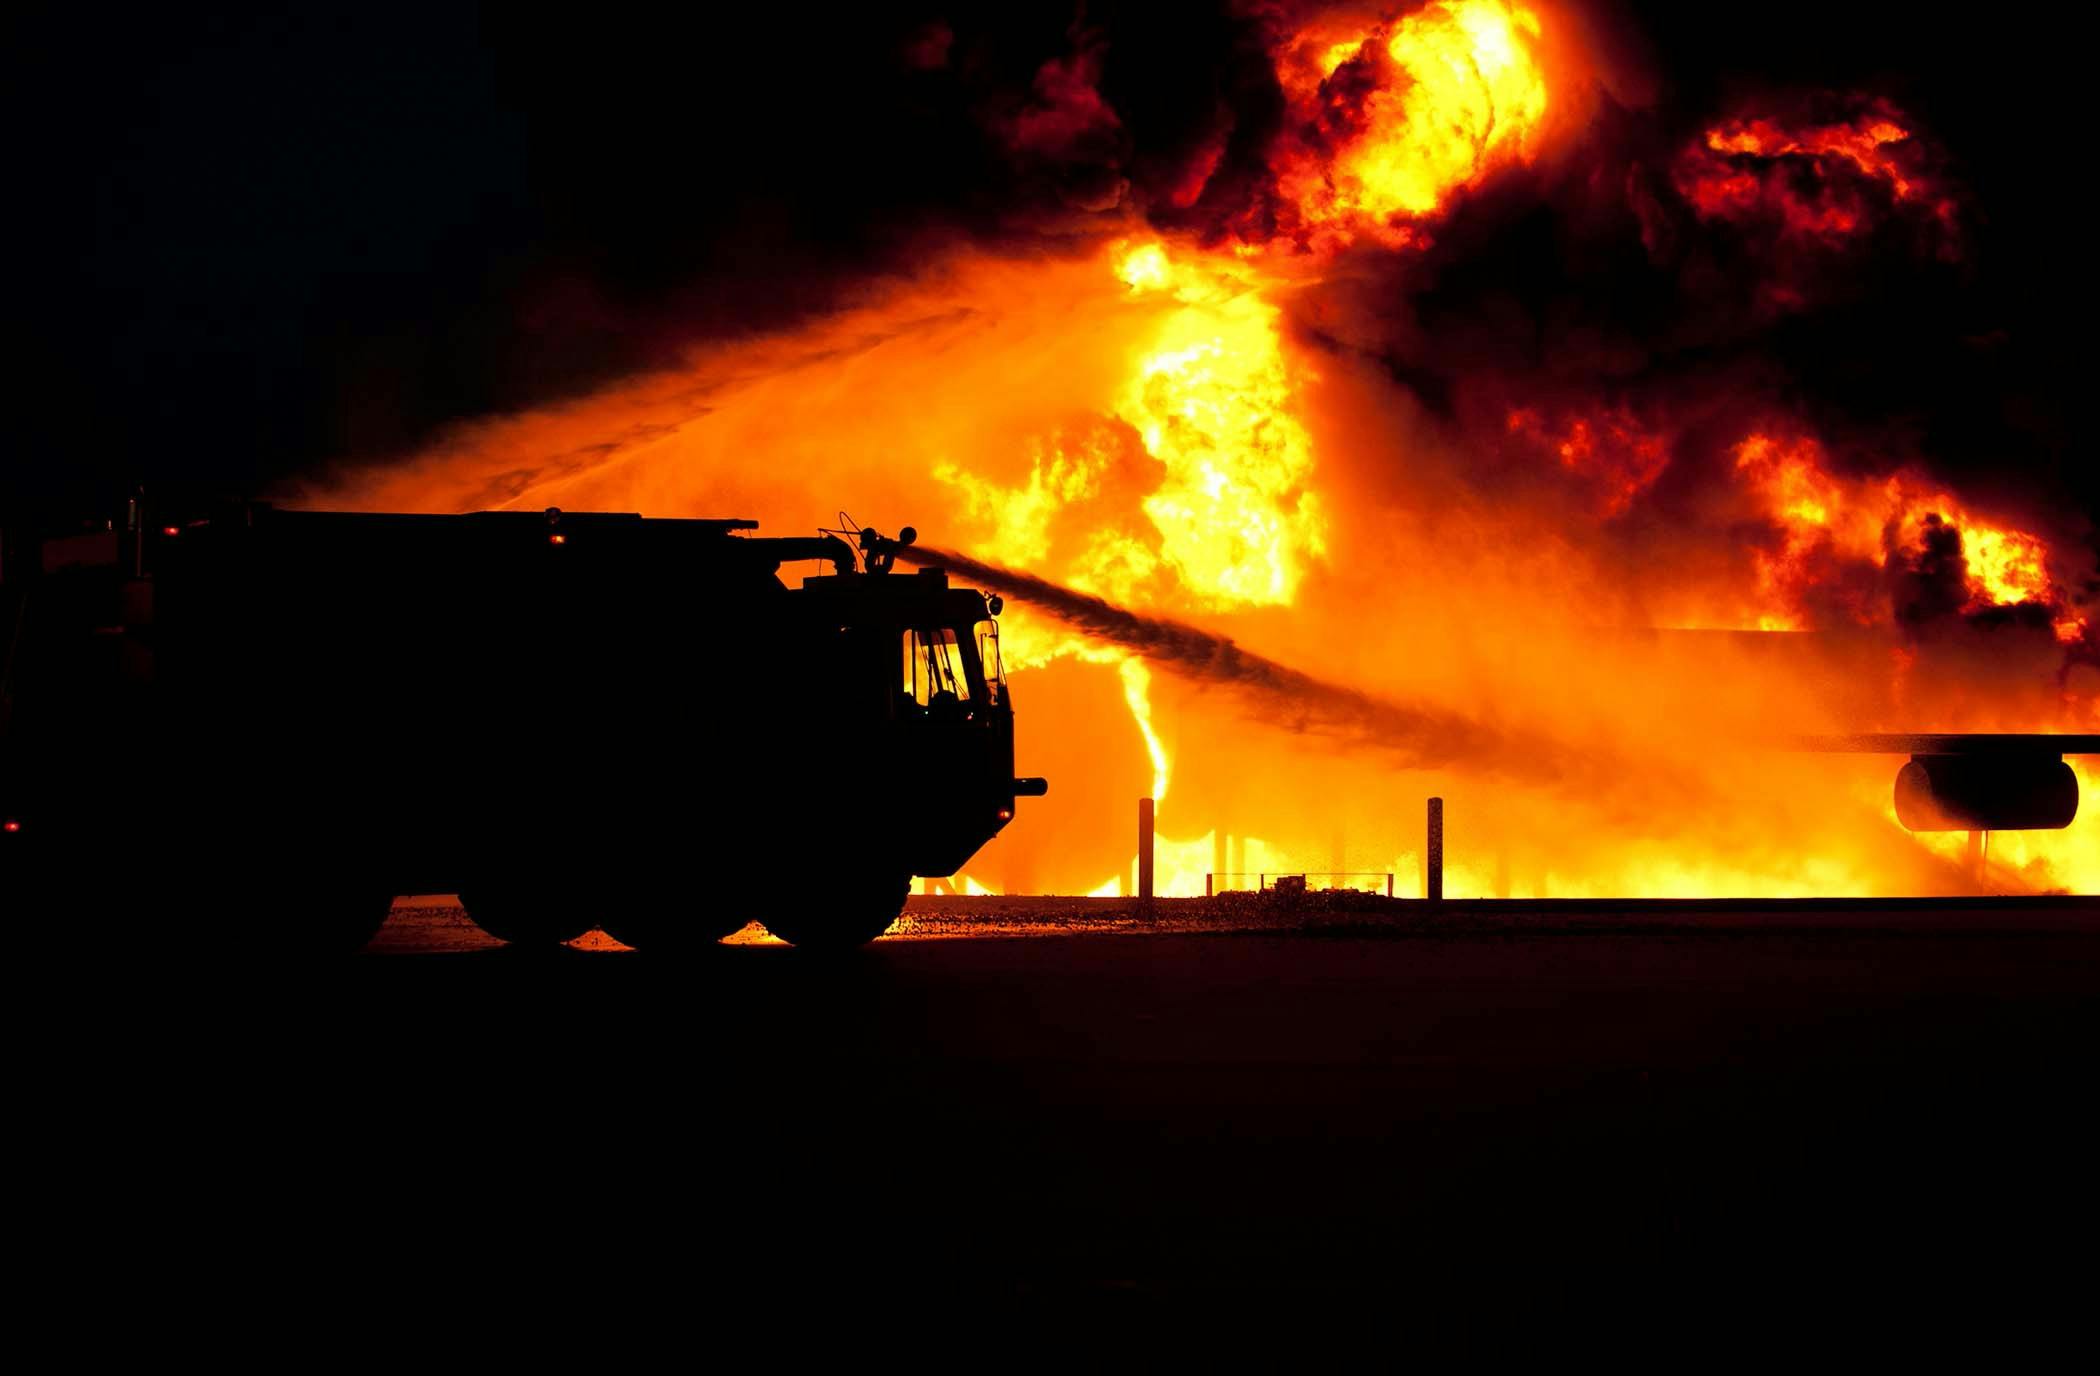 a fire truck spraying water on a large fire, a photo, pexels contest winner, profile picture 1024px, demolition, beautifully lit, high quality photo